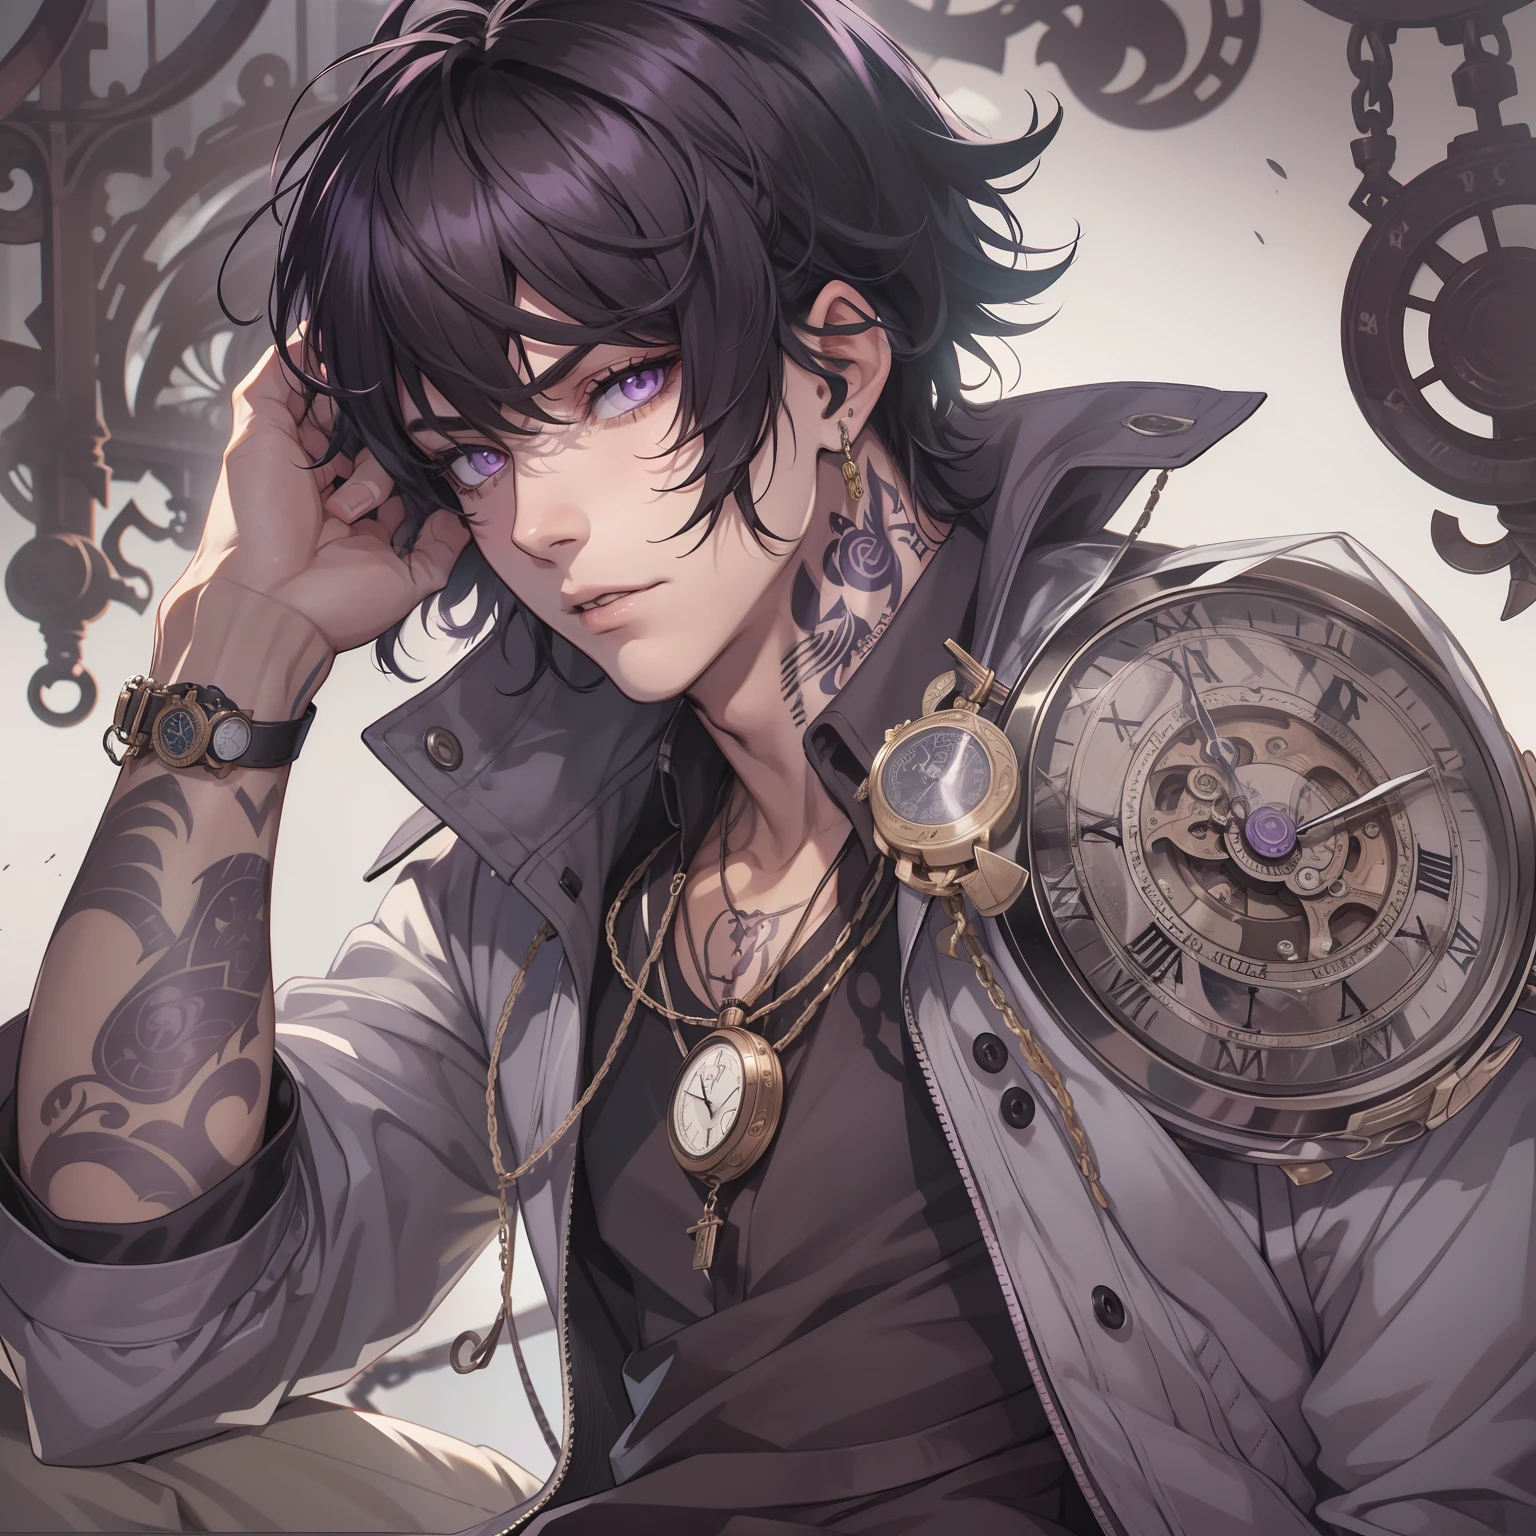 I asked an A.I to Draw Klein Moretti in a “Steampunk Style” and